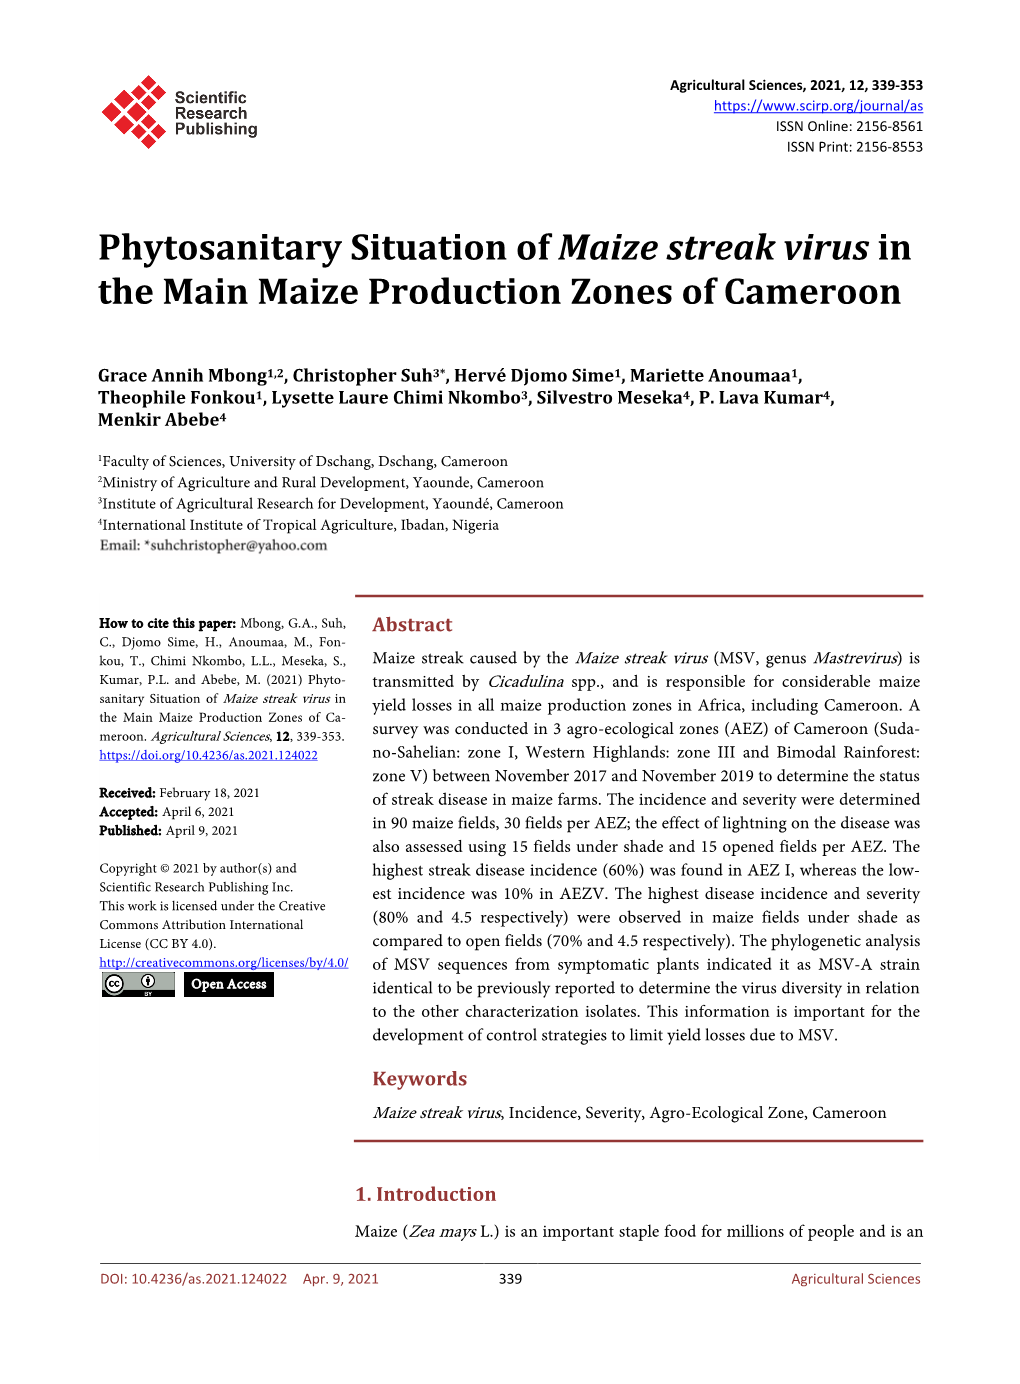 Phytosanitary Situation of Maize Streak Virus in the Main Maize Production Zones of Cameroon